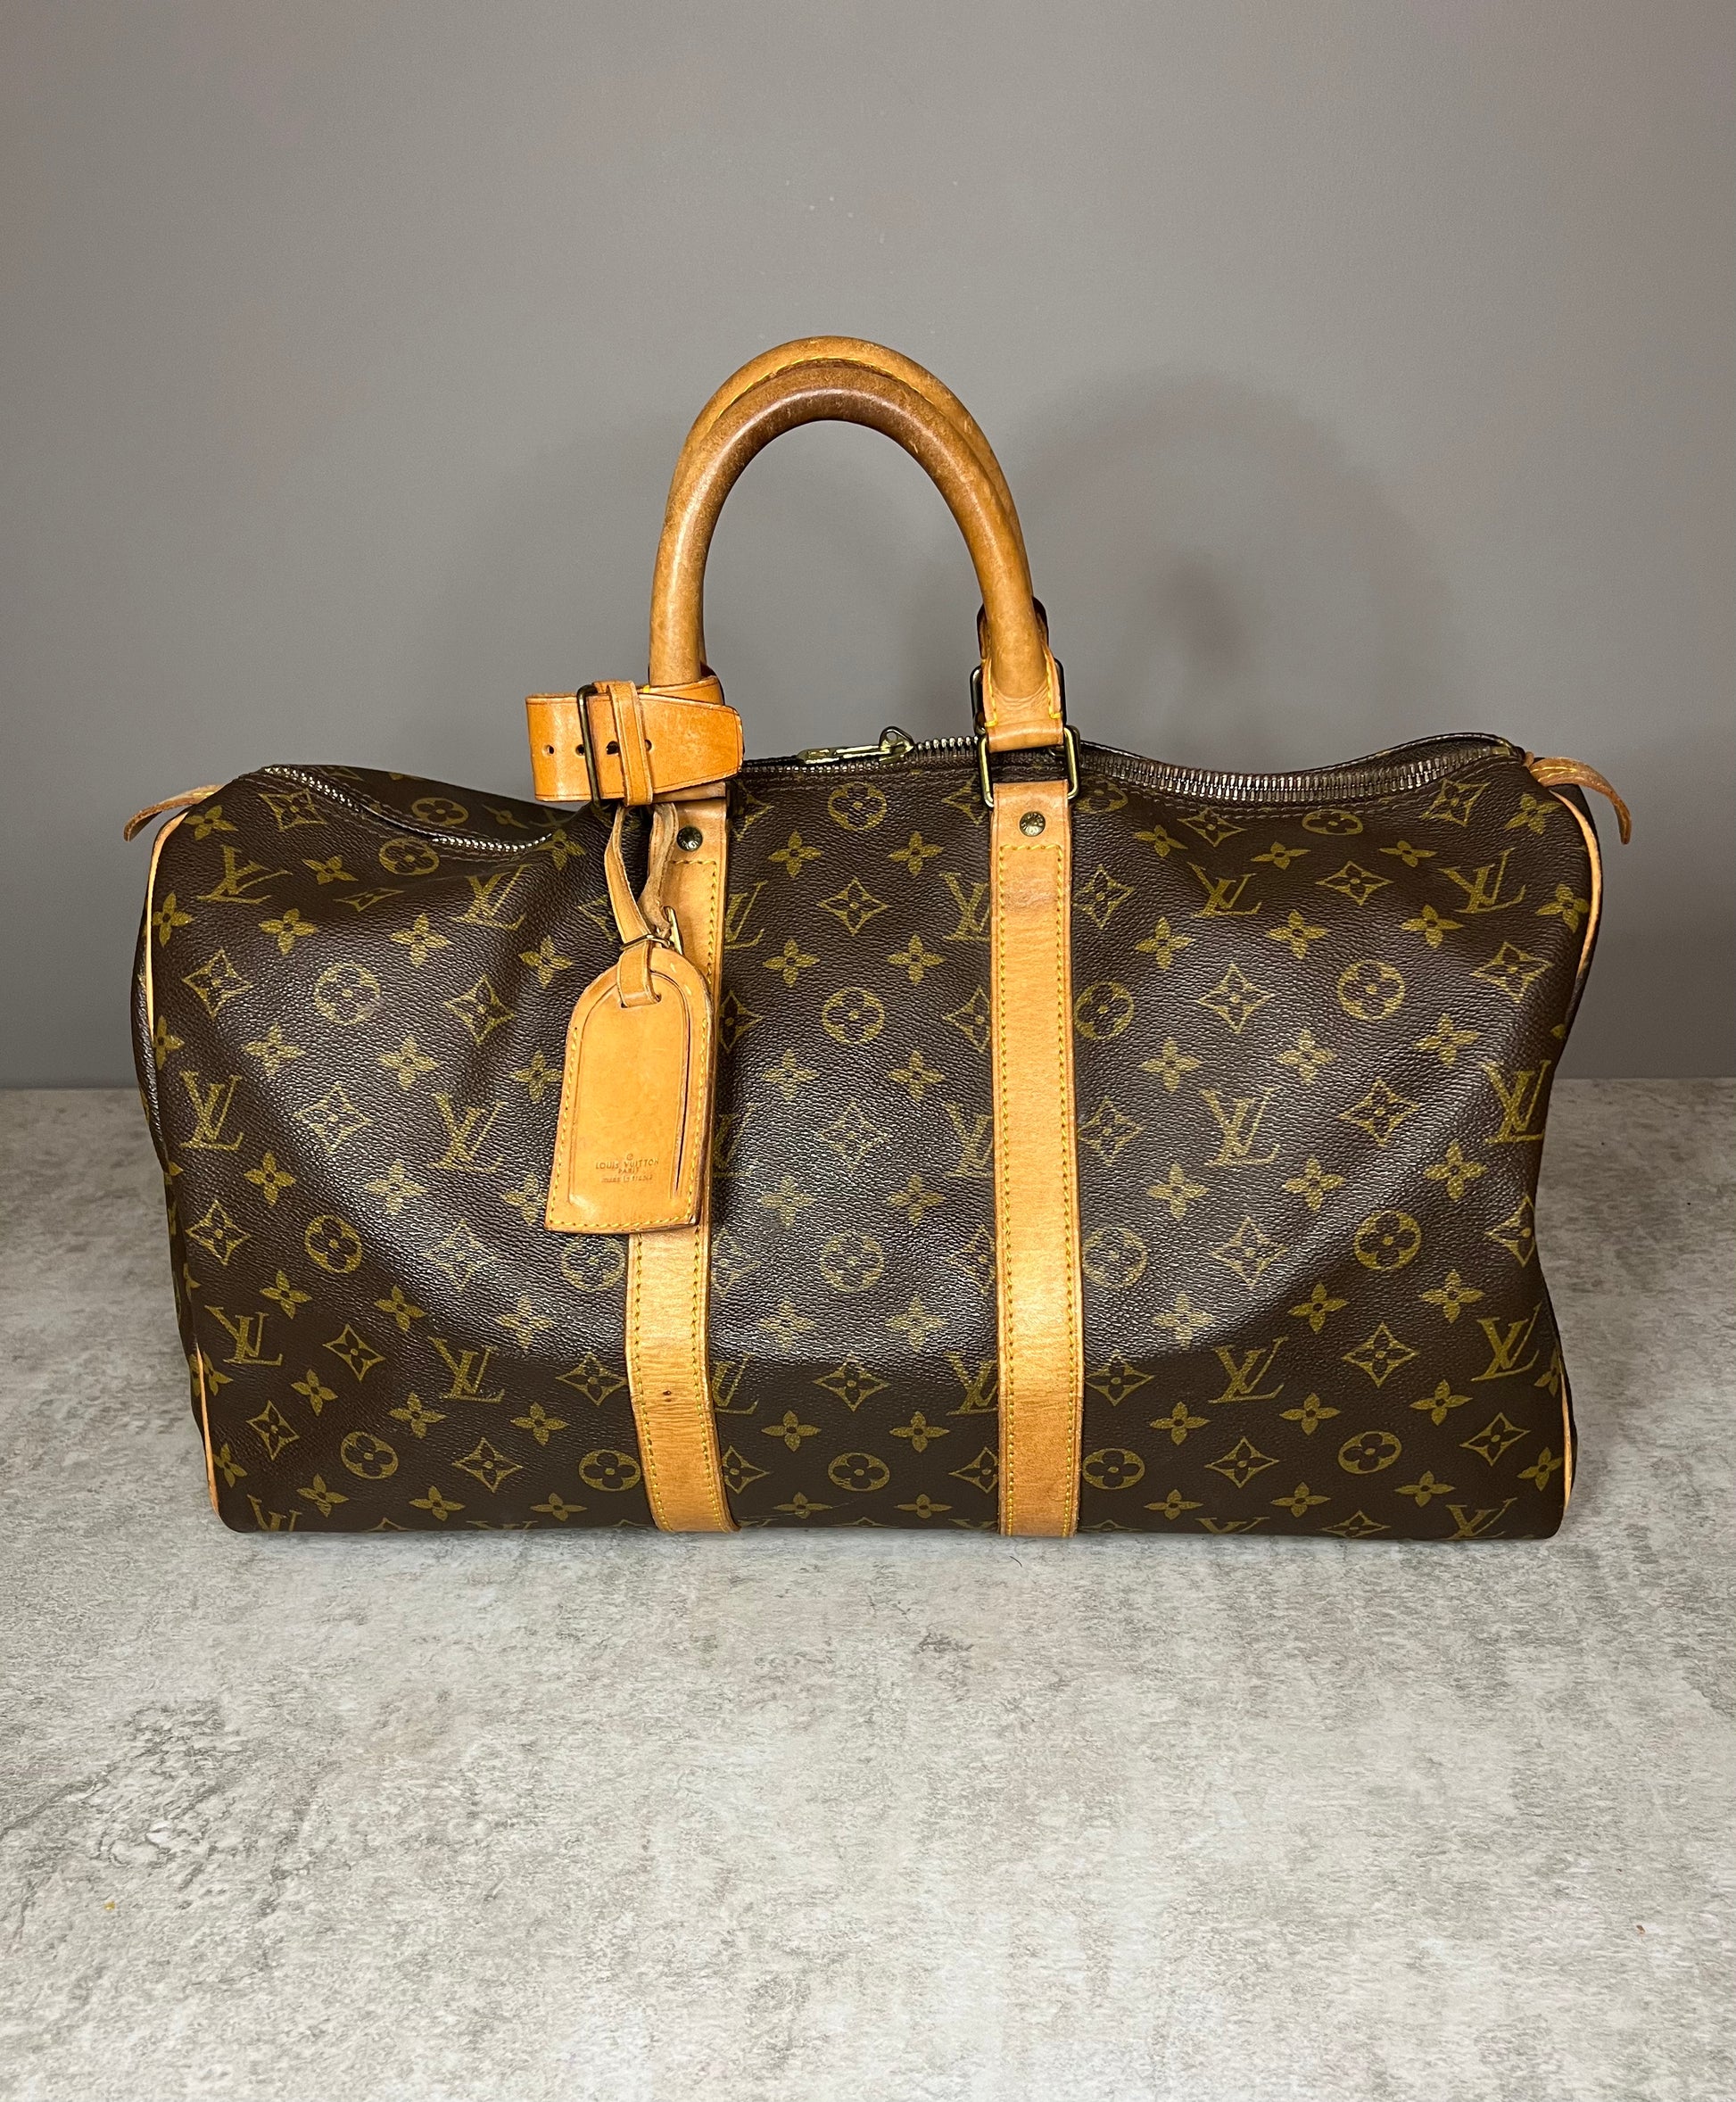 Louis Vuitton Keepall 45 Used - 11 For Sale on 1stDibs  lv keepall 45 price,  used louis vuitton keepall, louis vuitton keepall preloved